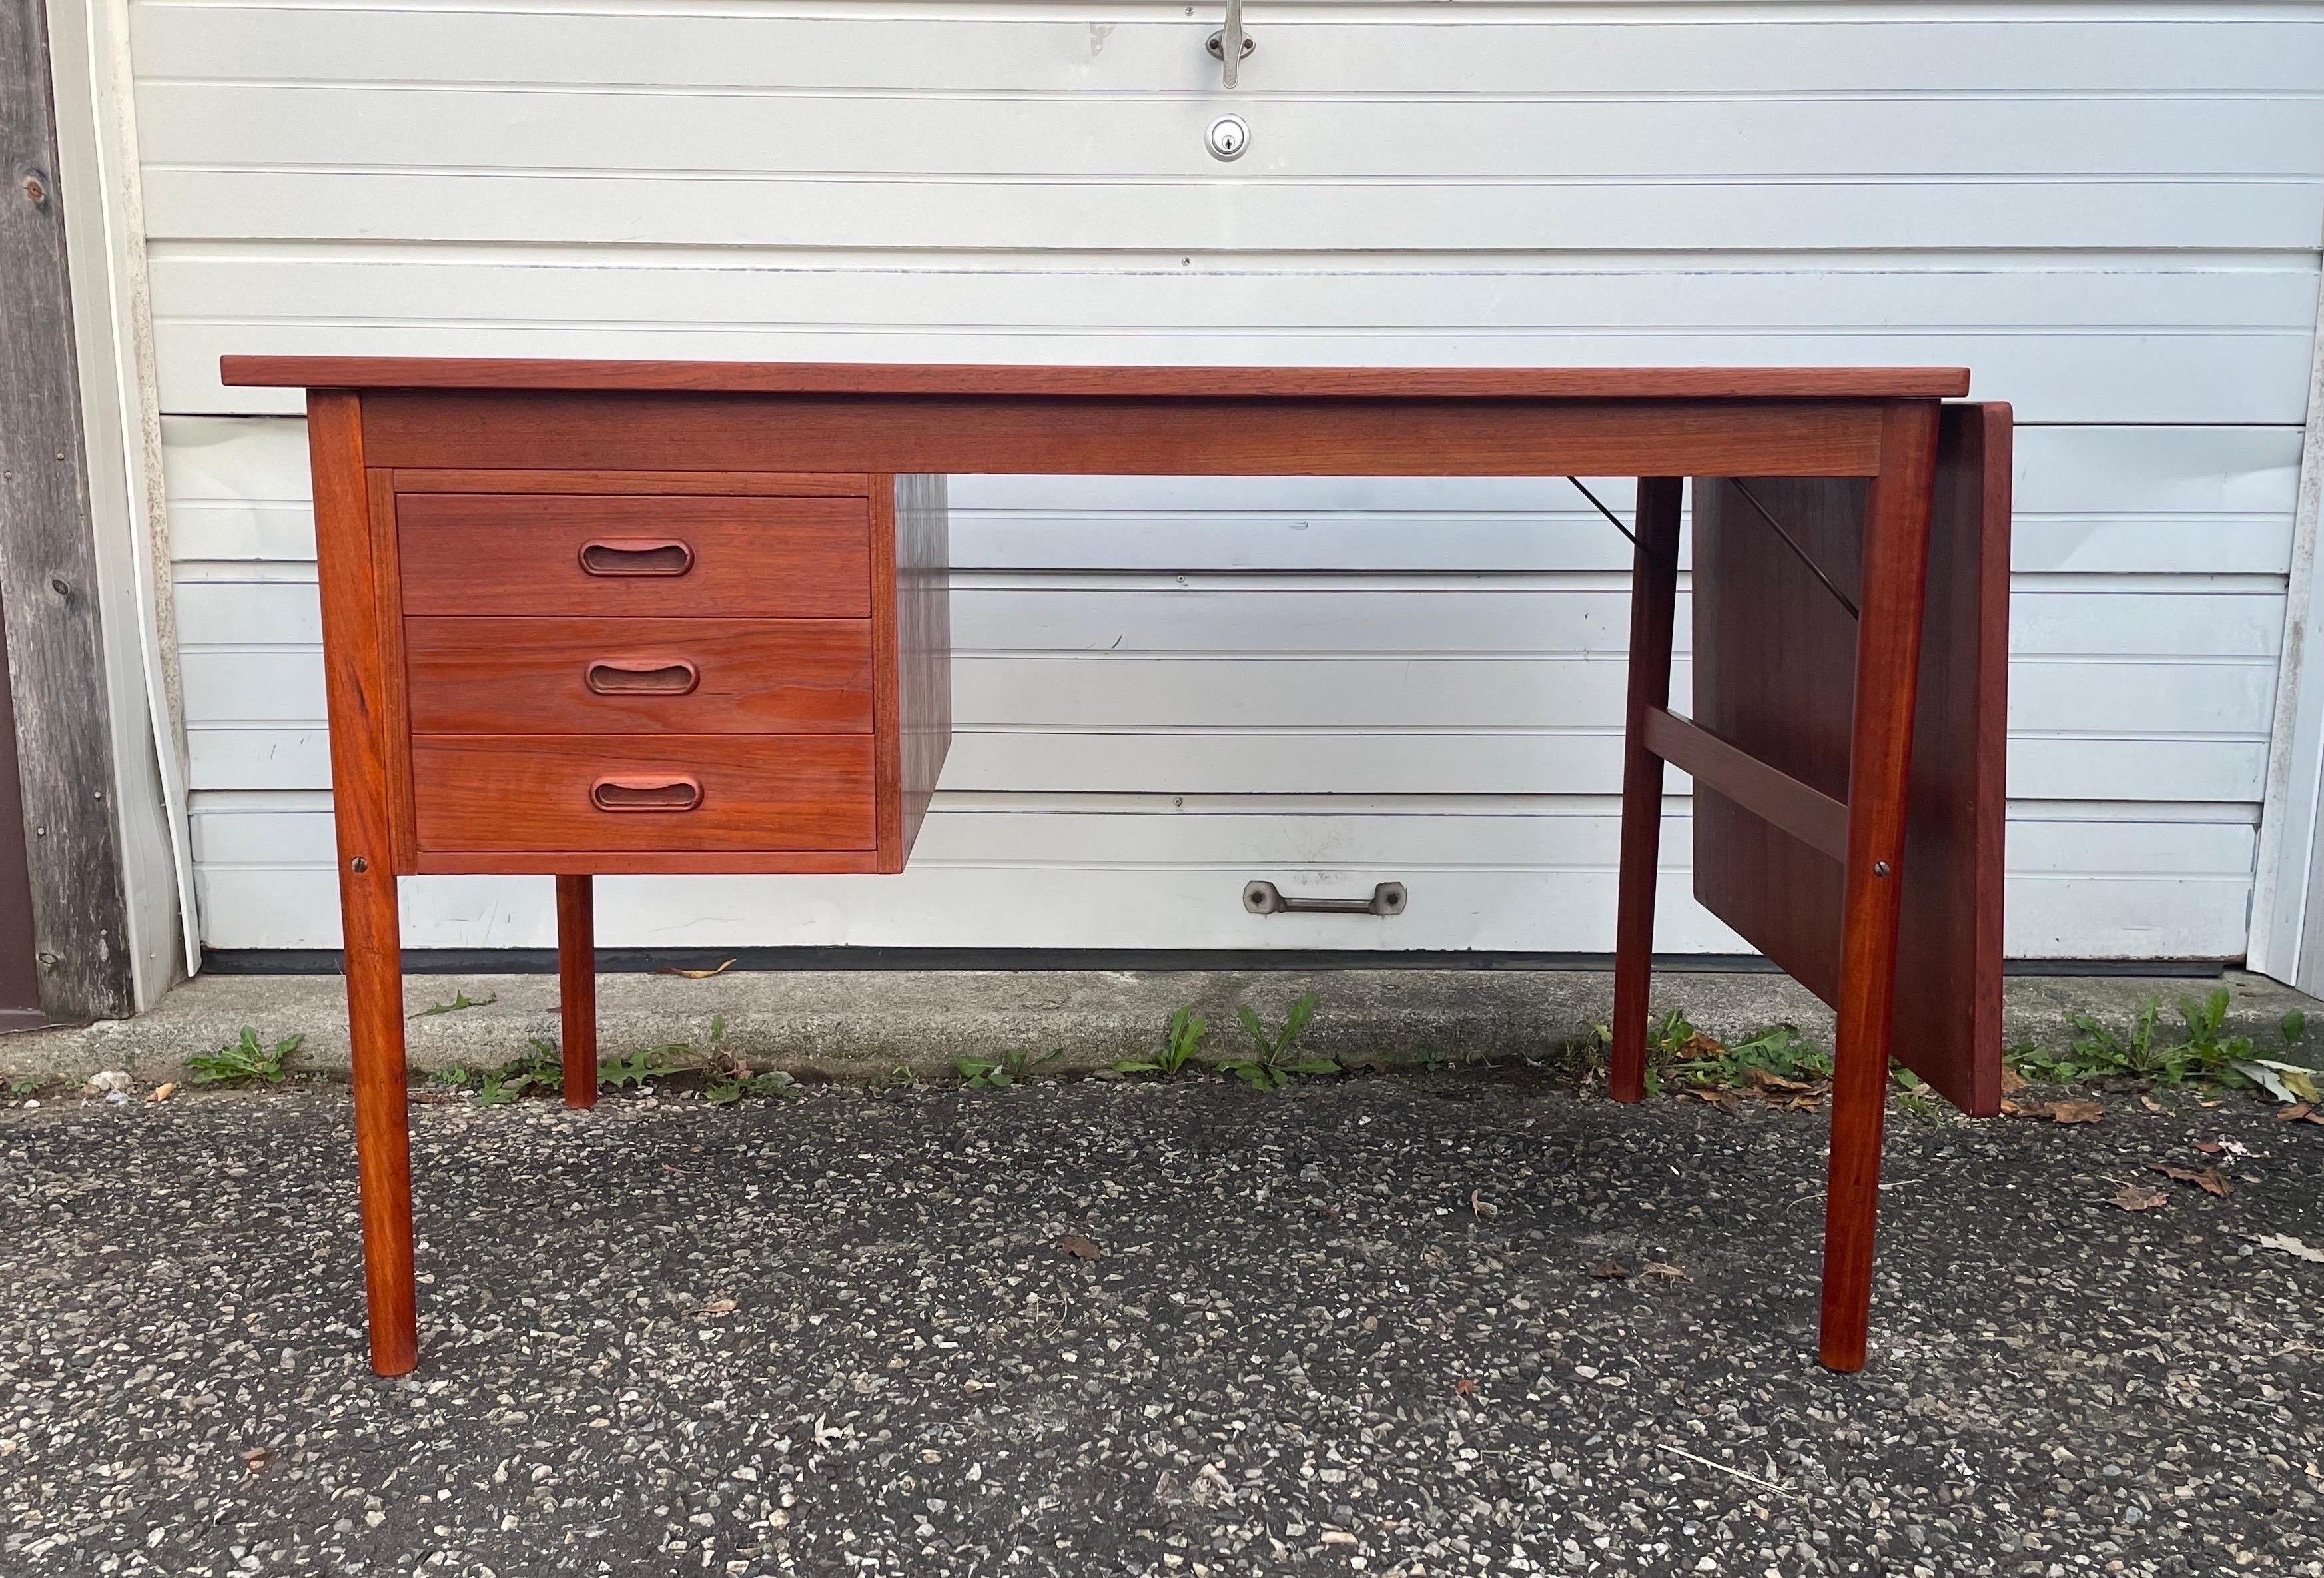 A teak desk attributed to Arne Vodder for H. Sigh & Sons. Featuring 3 drawers and a drop leaf that can be easily lifted into place to expand the desktop’s workspace.

25 3/8” D x 28 3/8” H

With the drop leaf folded down, the desk measures 46